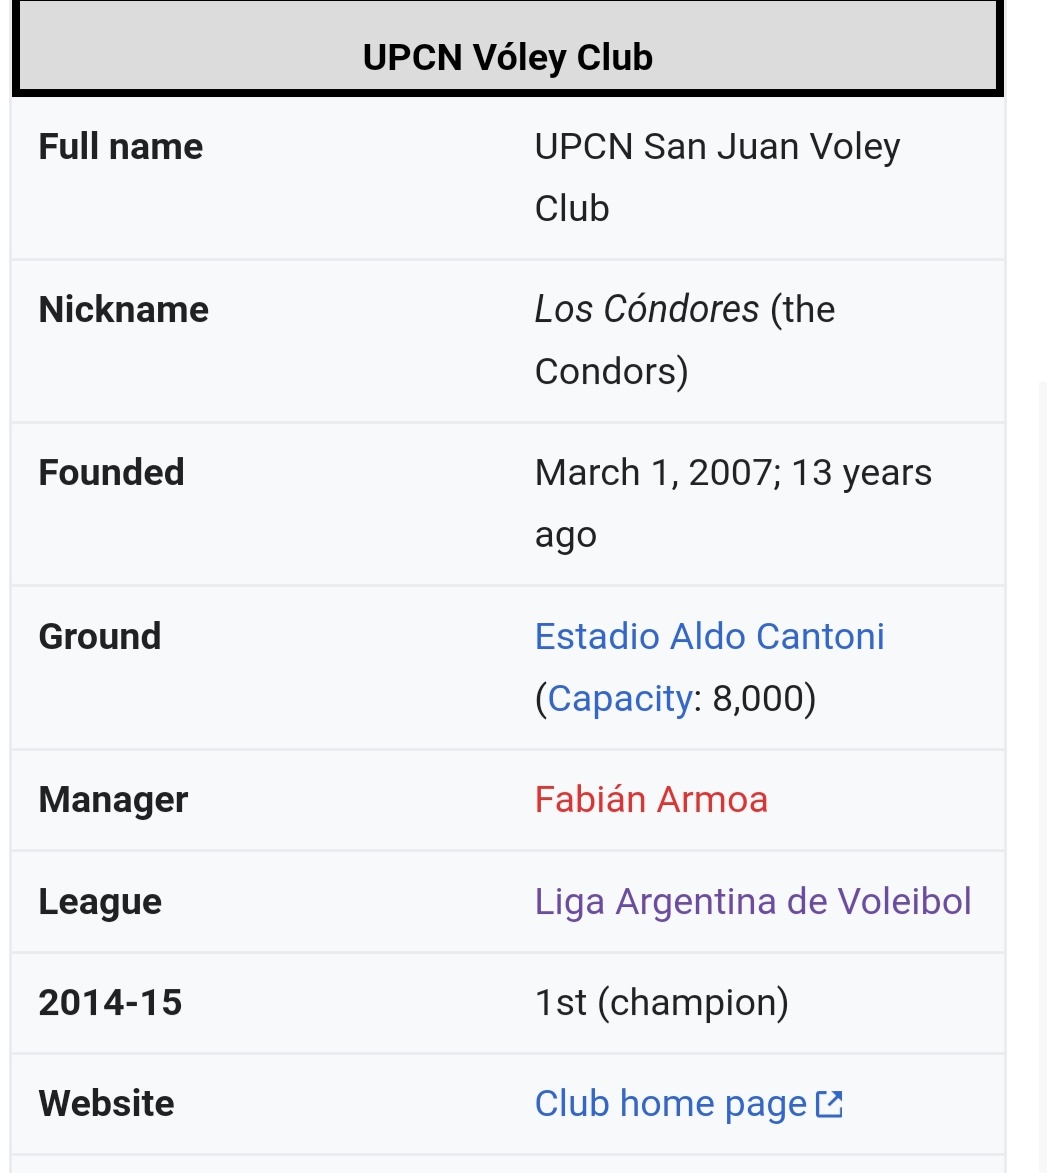 The fact that he joined is BIG because this is no normal team this is a team that won 5 times in a row the liga argentina de voleibol. Ofc they dont accept anyone